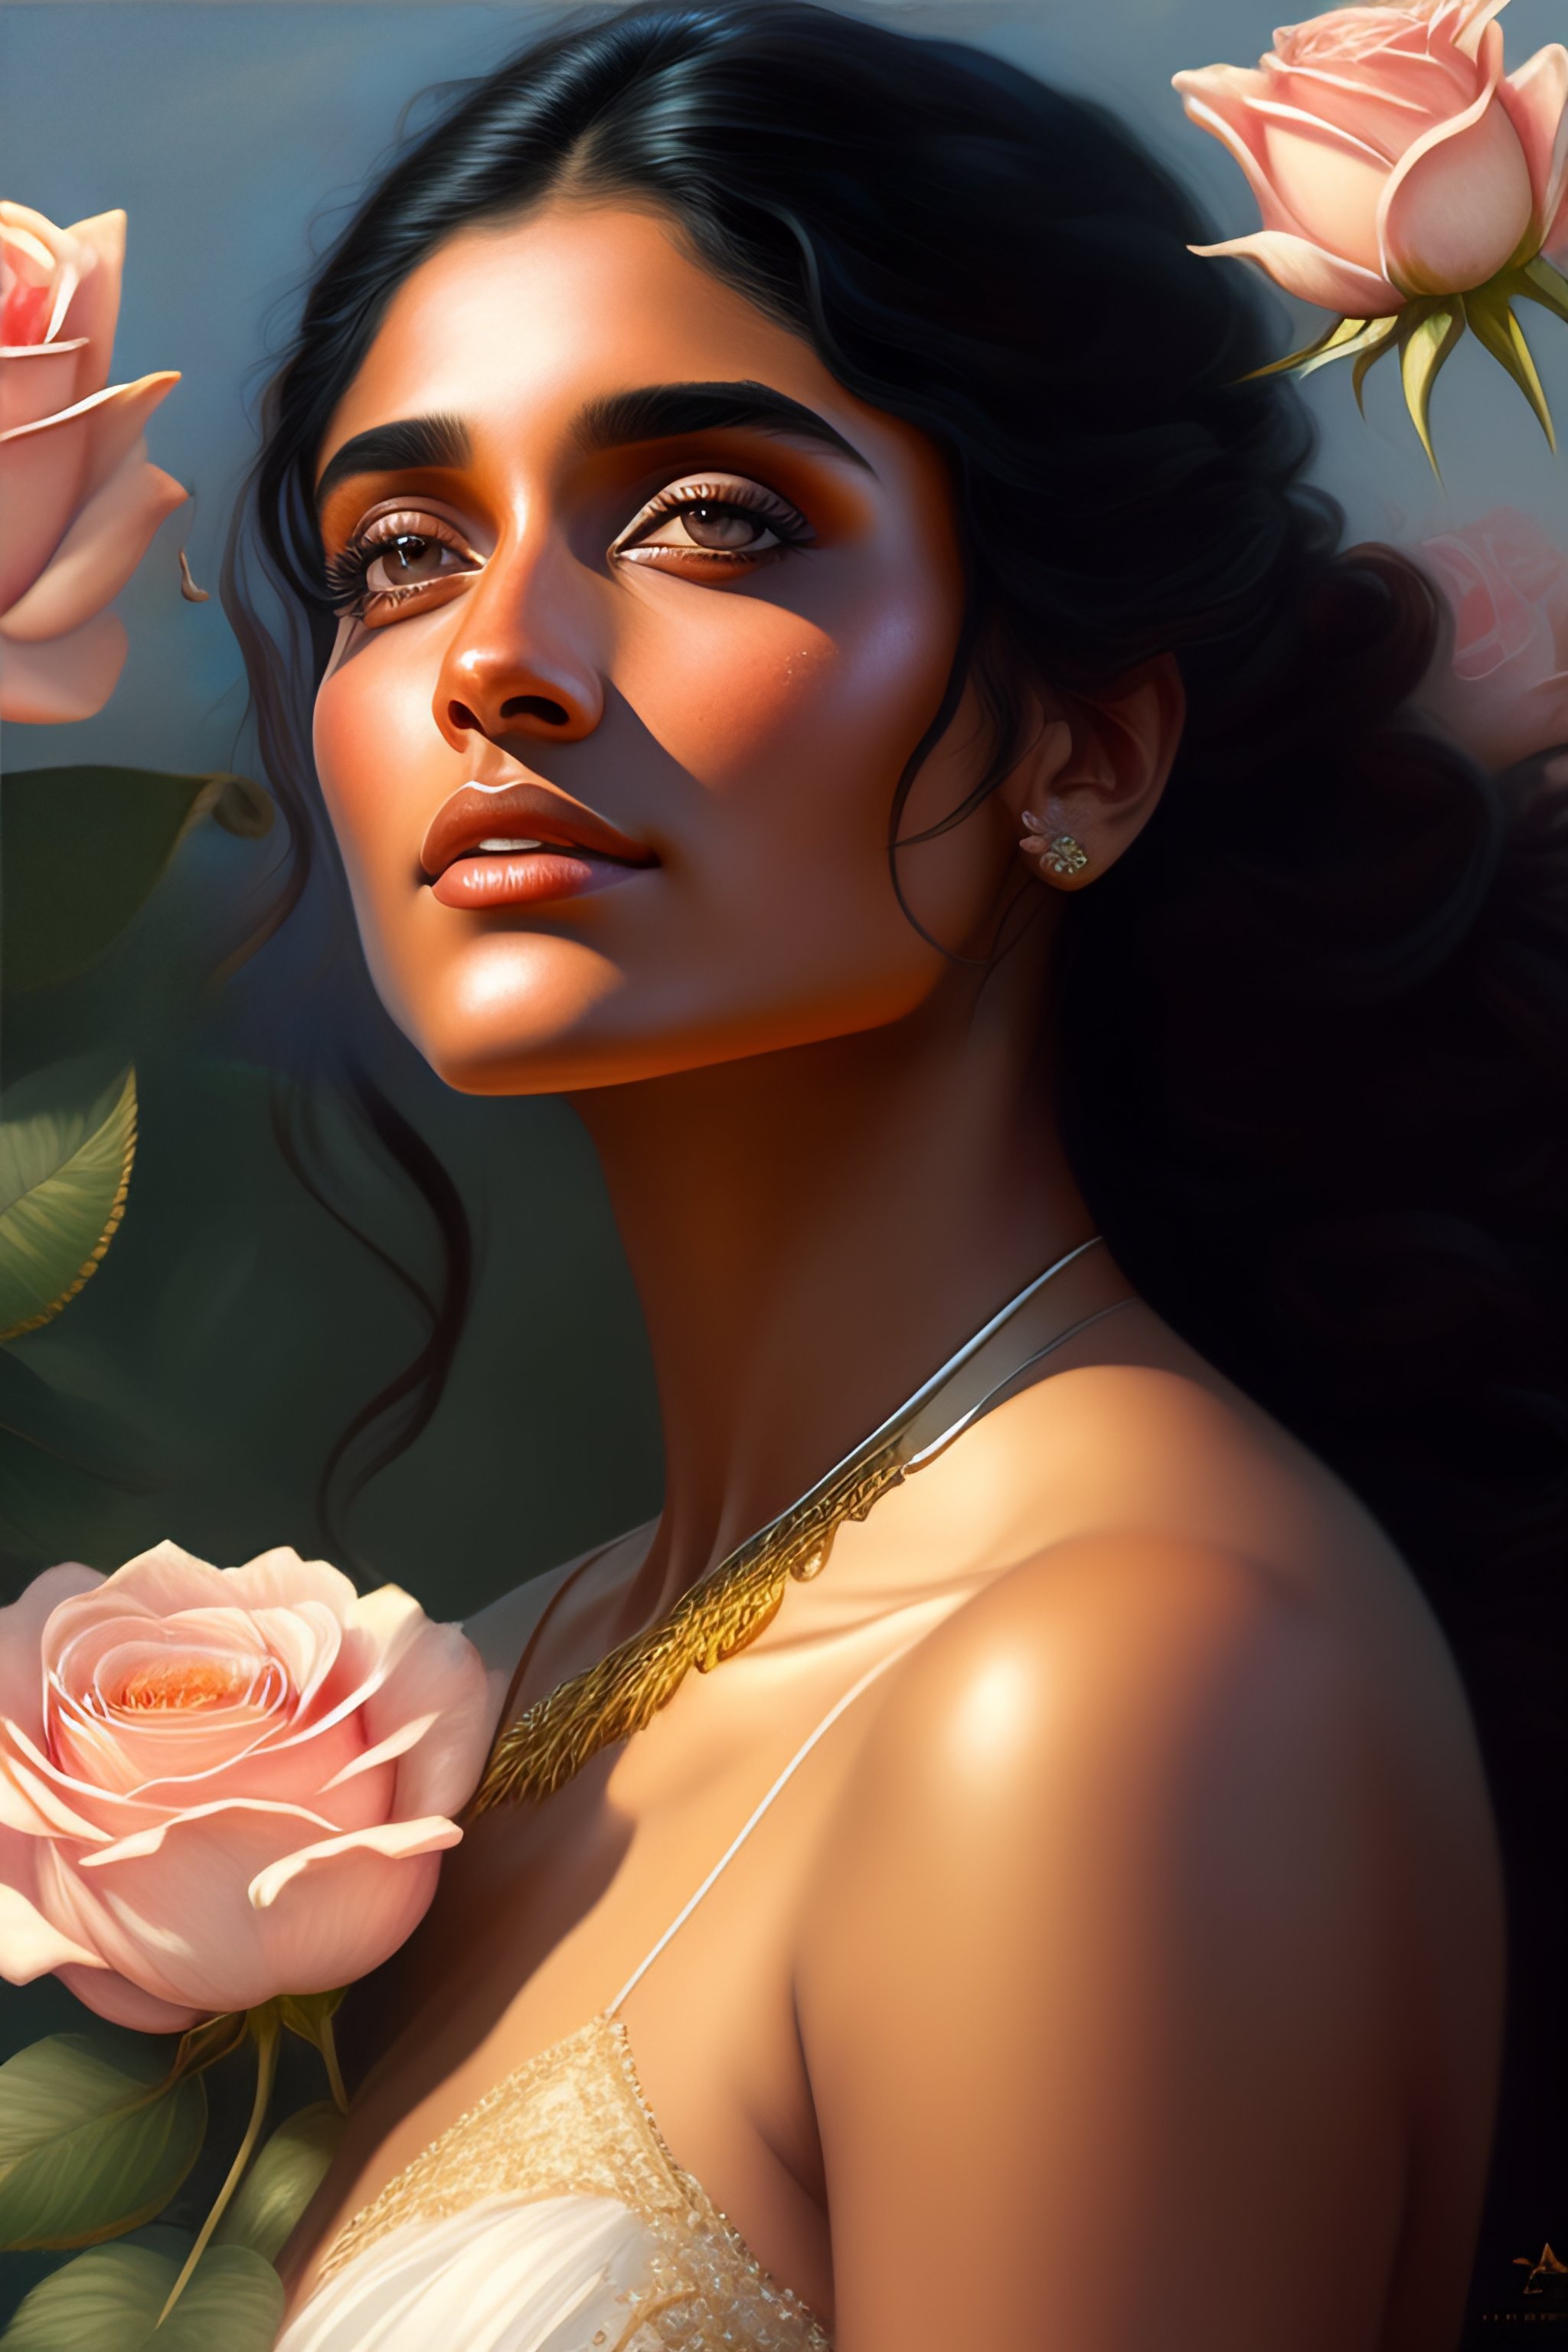 Lexica - Spanish woman niveda thomas, smelling a flower, roses